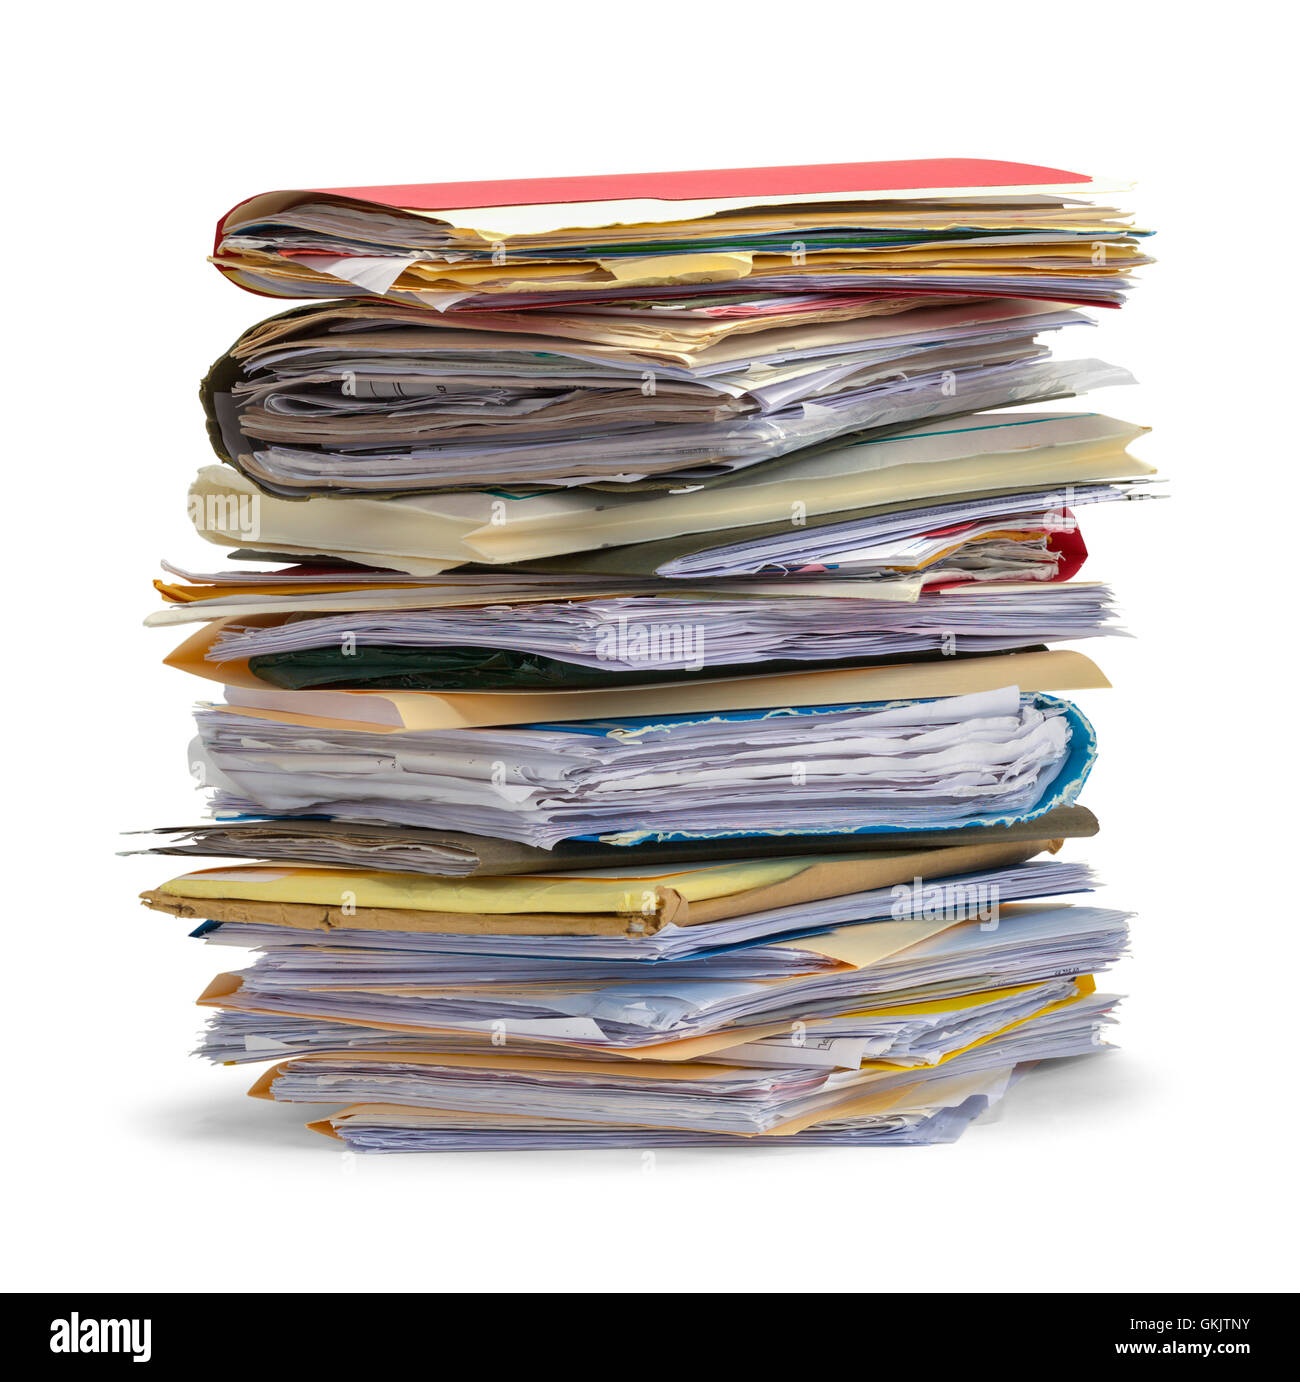 Large Pile Of Messy Files Isolated on White Background. Stock Photo